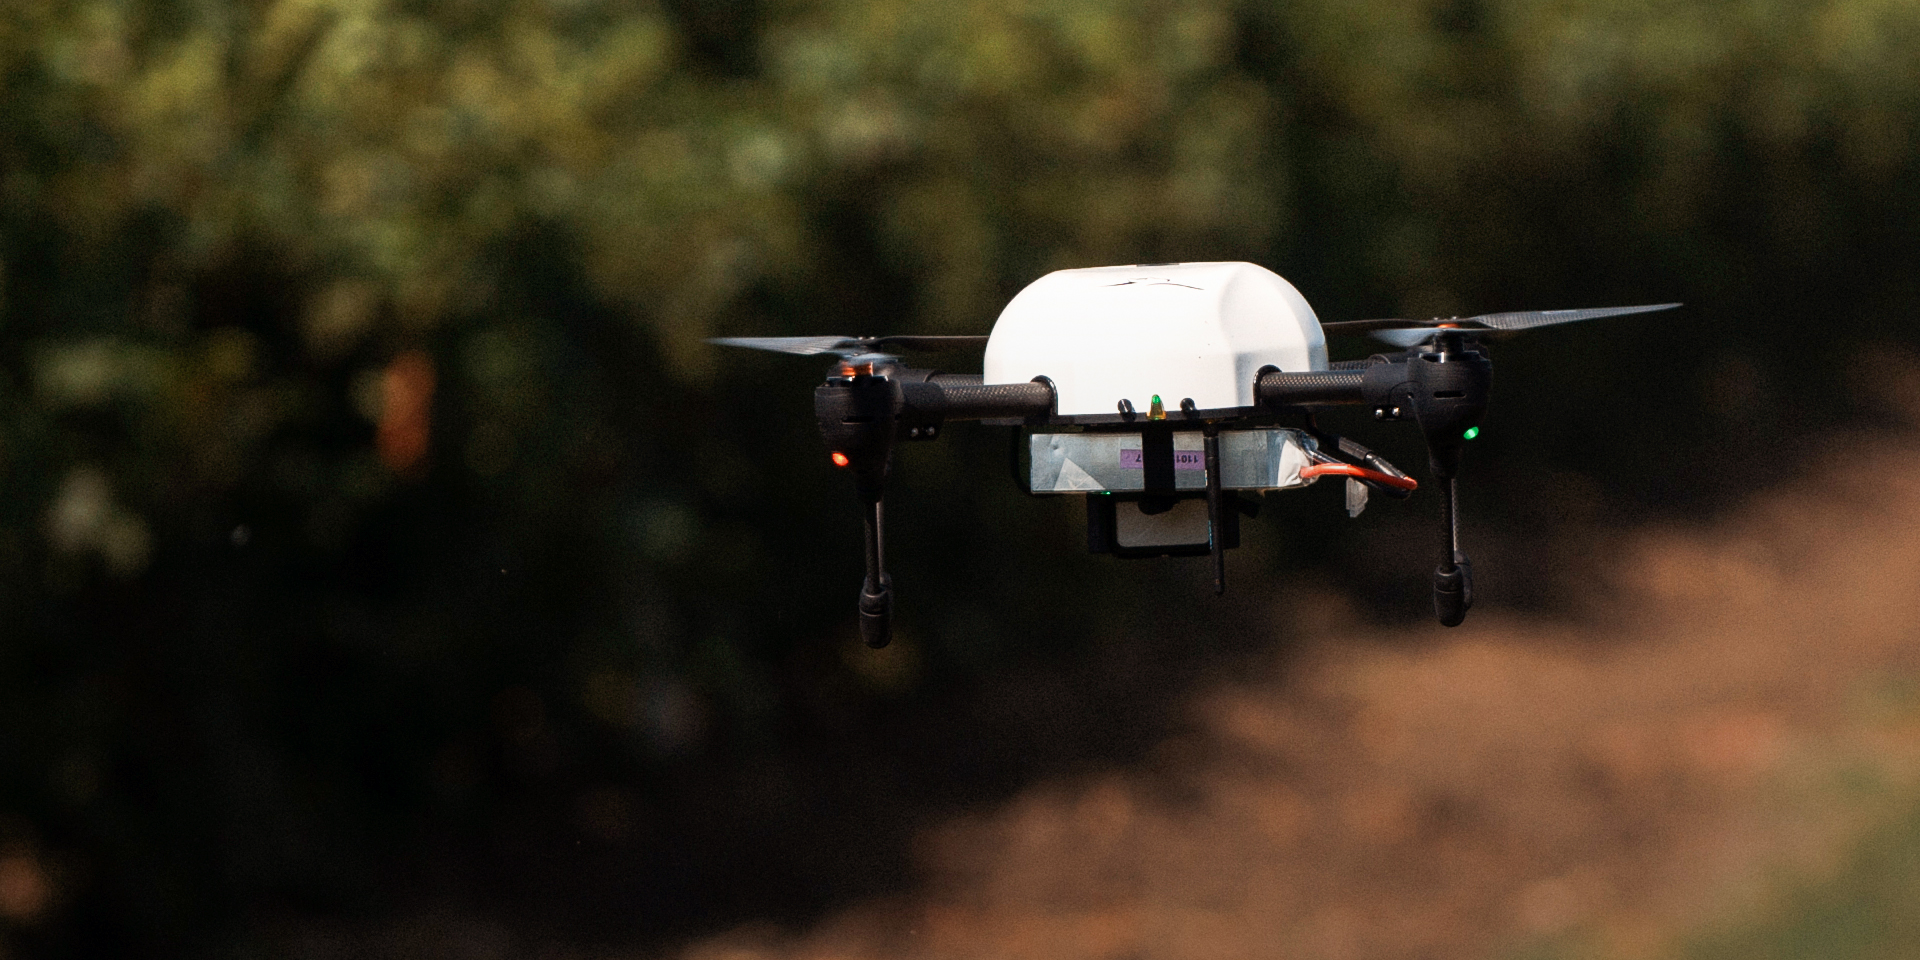 A close-up image of a flying drone.